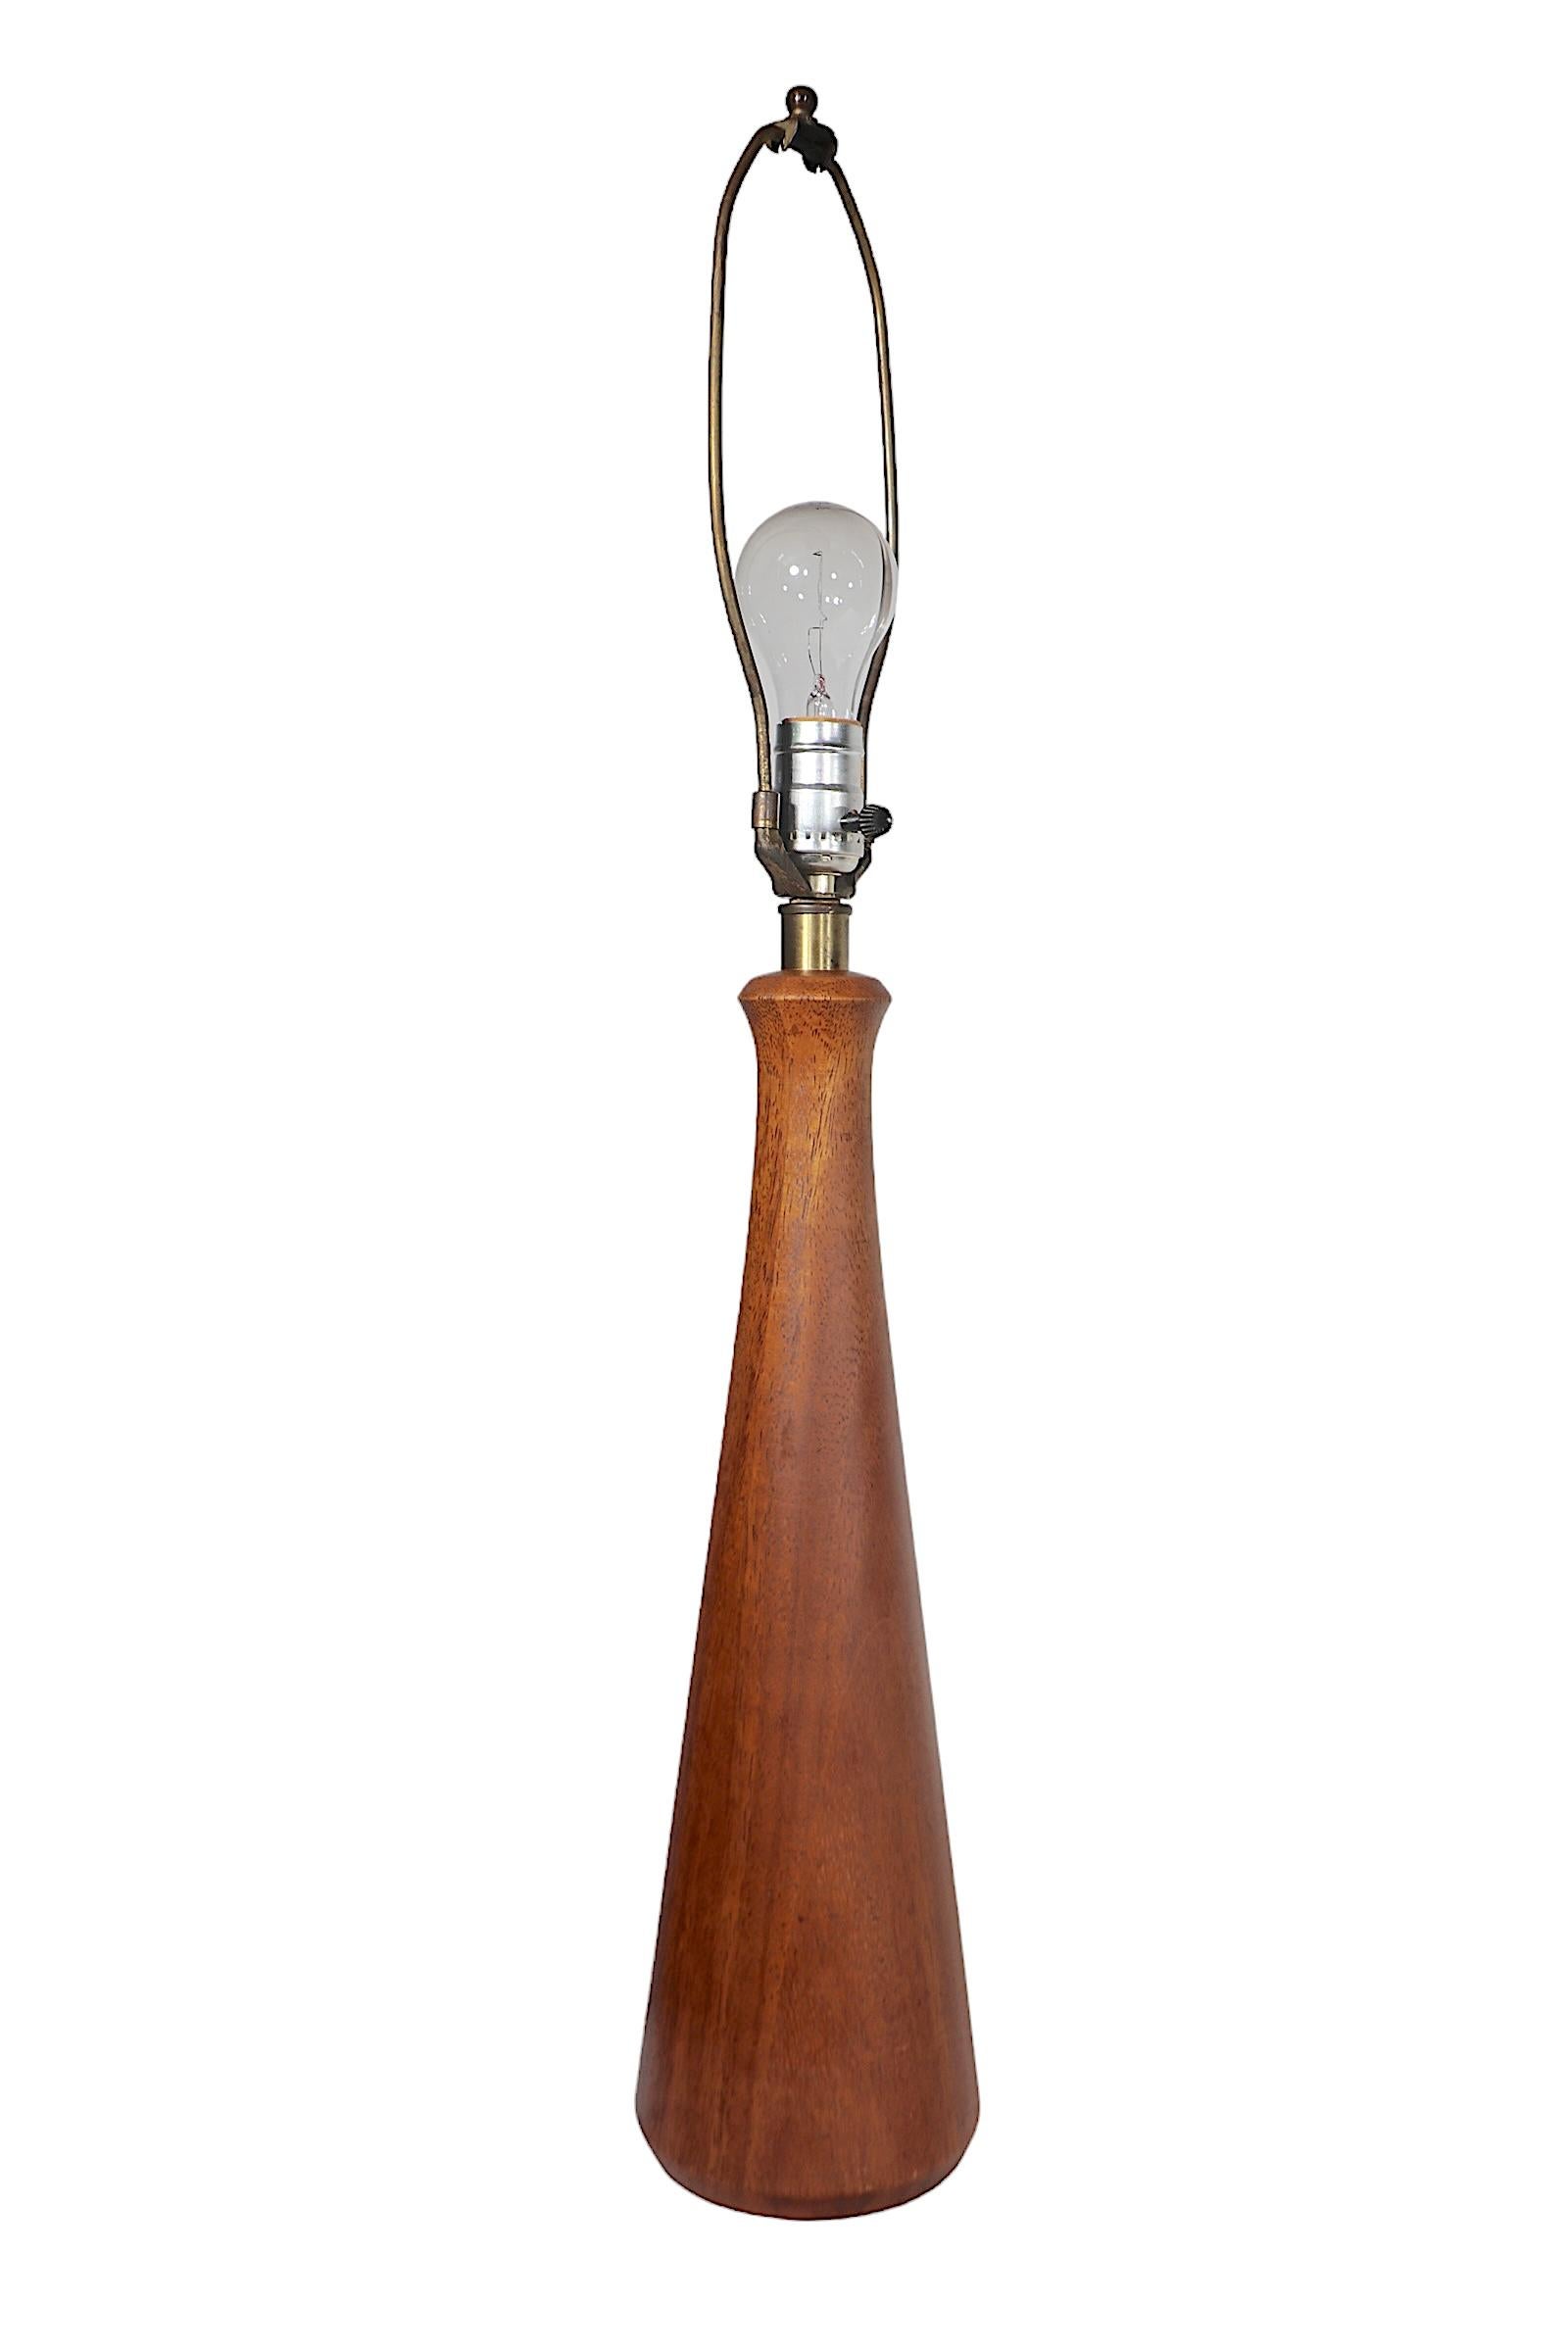  Danish Style Mid Century Wood Table Lamp c 1950/60's In Good Condition For Sale In New York, NY